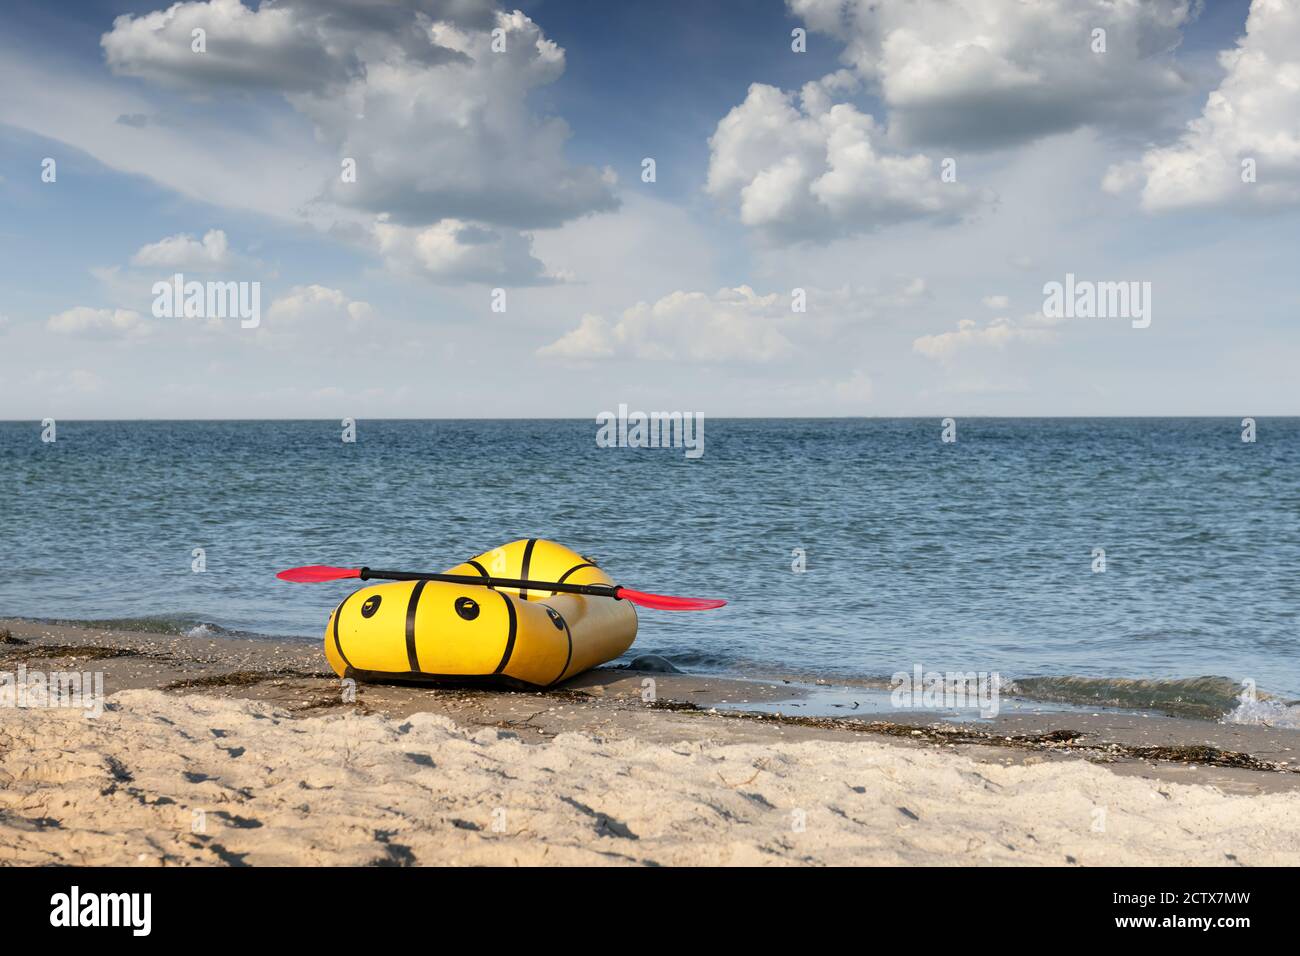 Yellow packraft rubber boat with red padle on a sea coast. Packrafting. Active lifestile concept Stock Photo